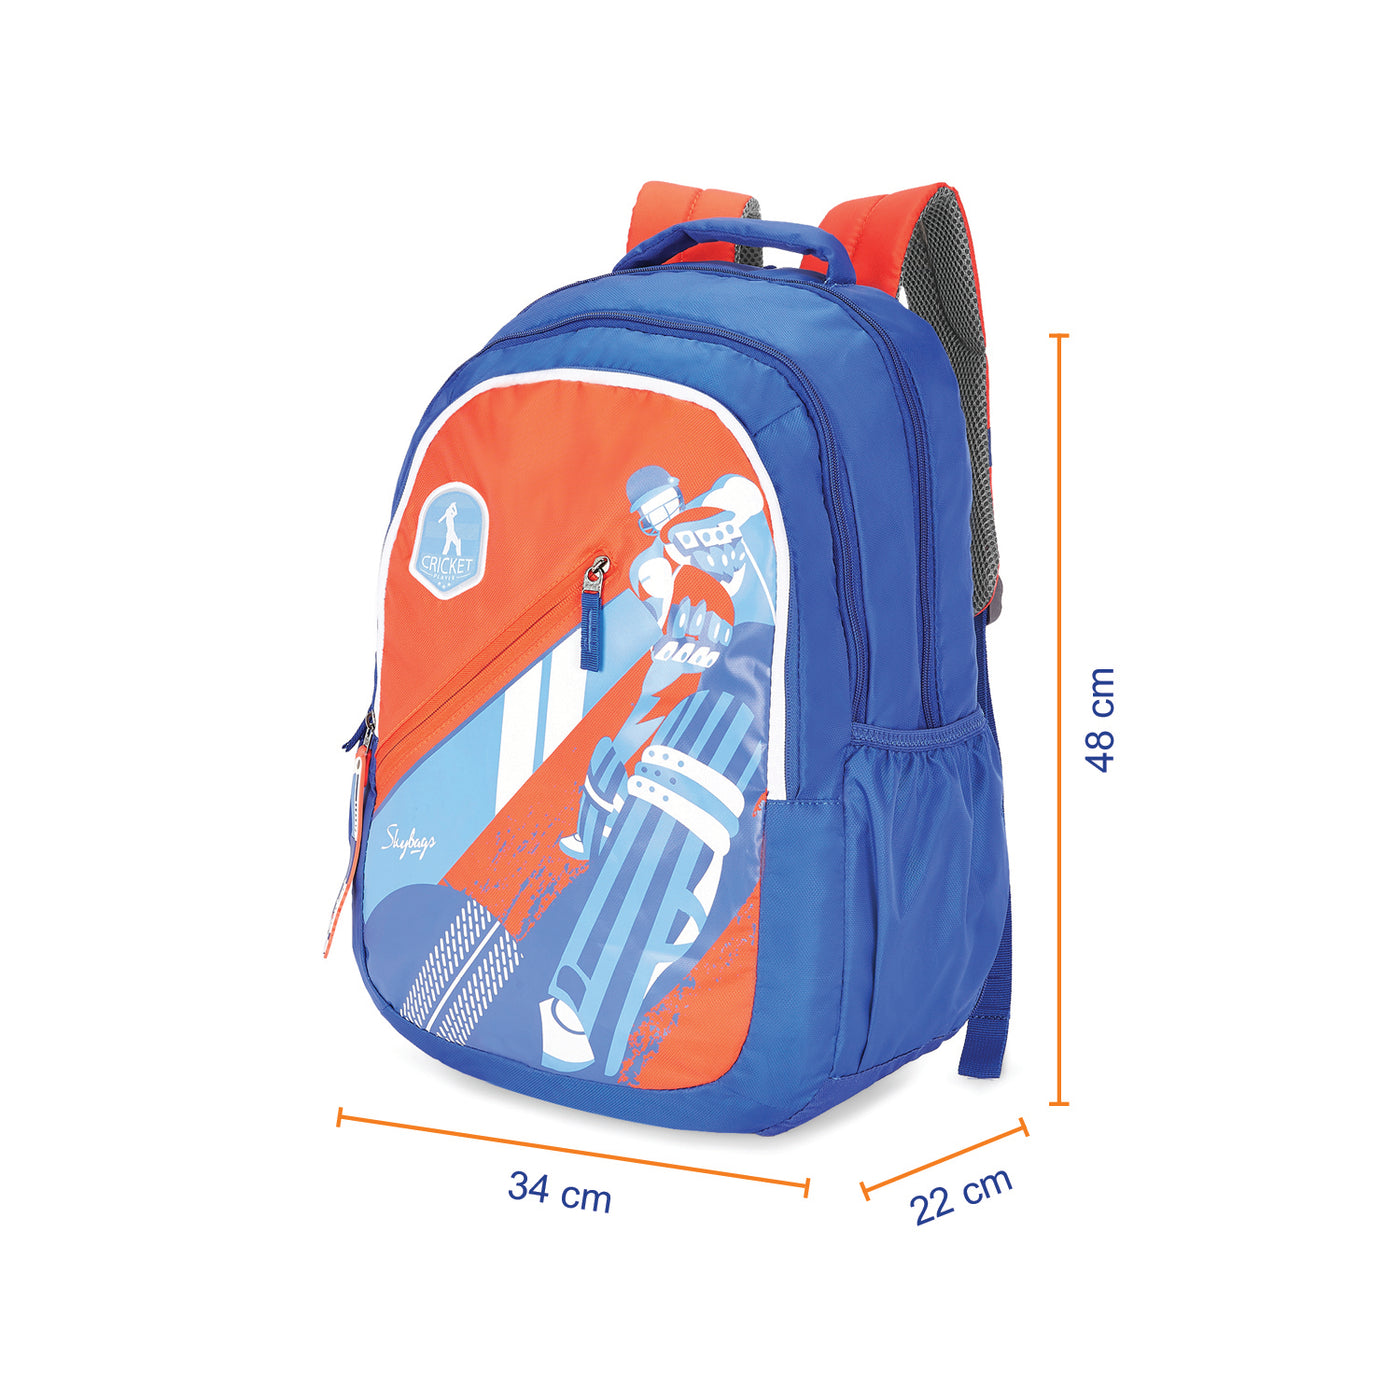 Skybags Riddle 4 "School Bp Blue"